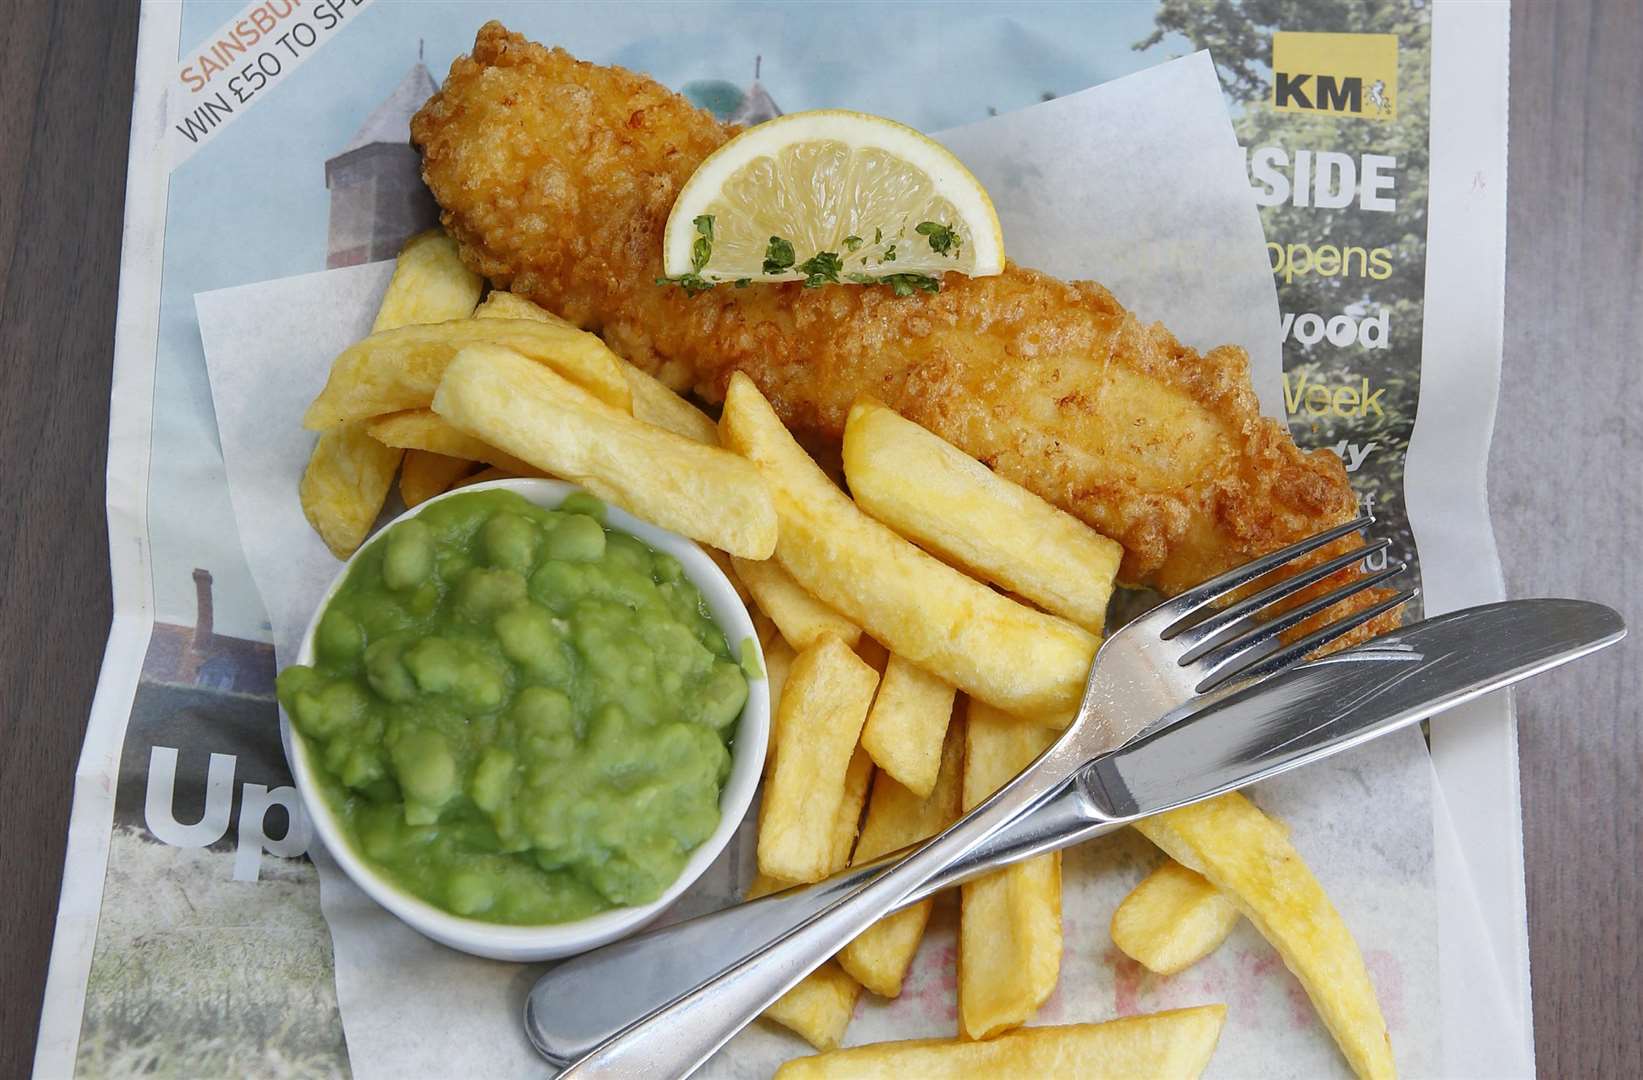 Ex-smokers can treat themselves to a helping of Kentish fish and chips